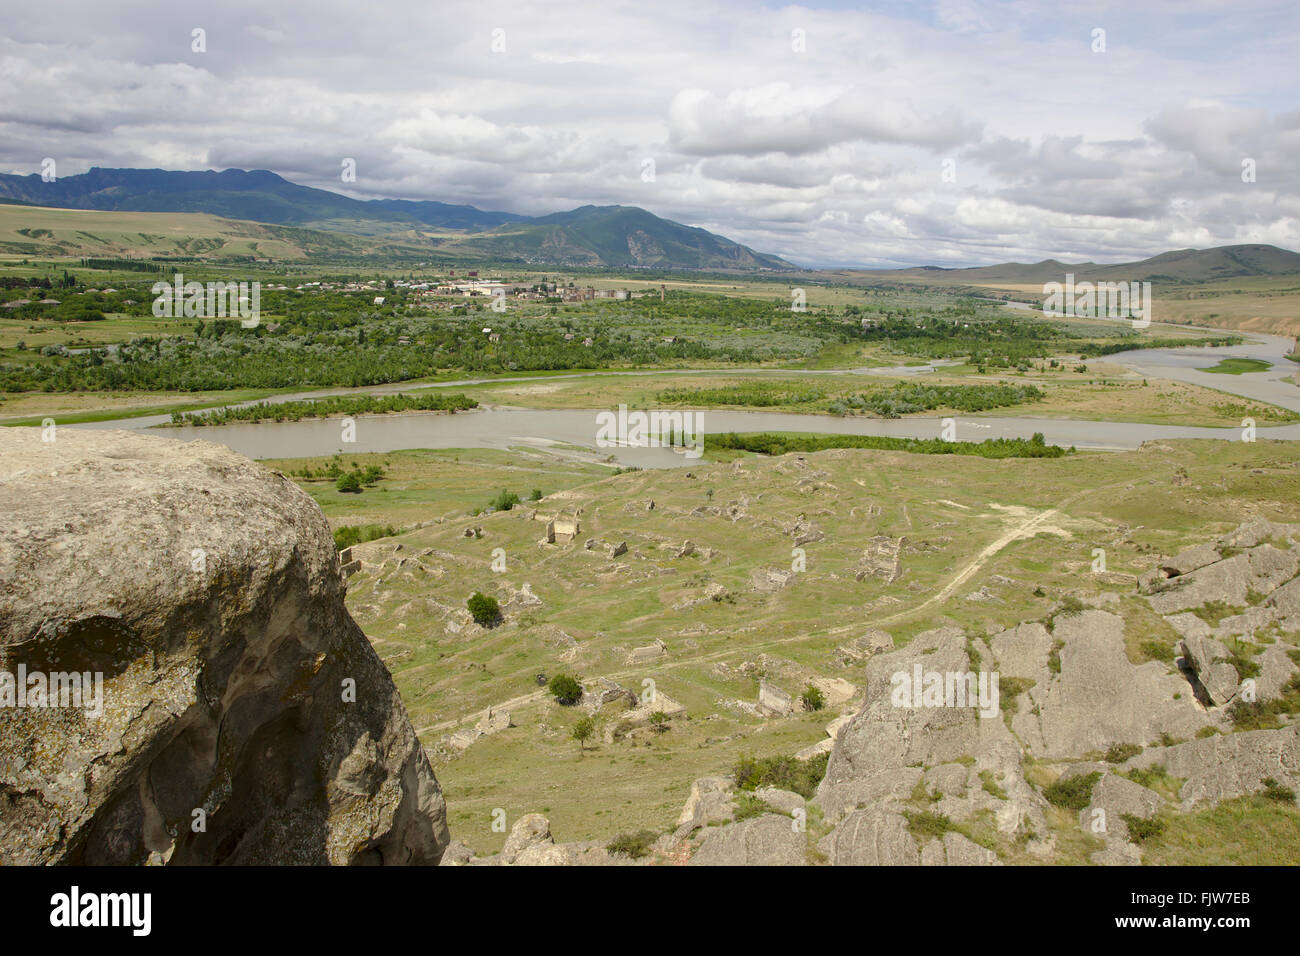 Uplistsikhe, ruins on the bank of Mtkvari River, view from the cave city, Georgia Stock Photo